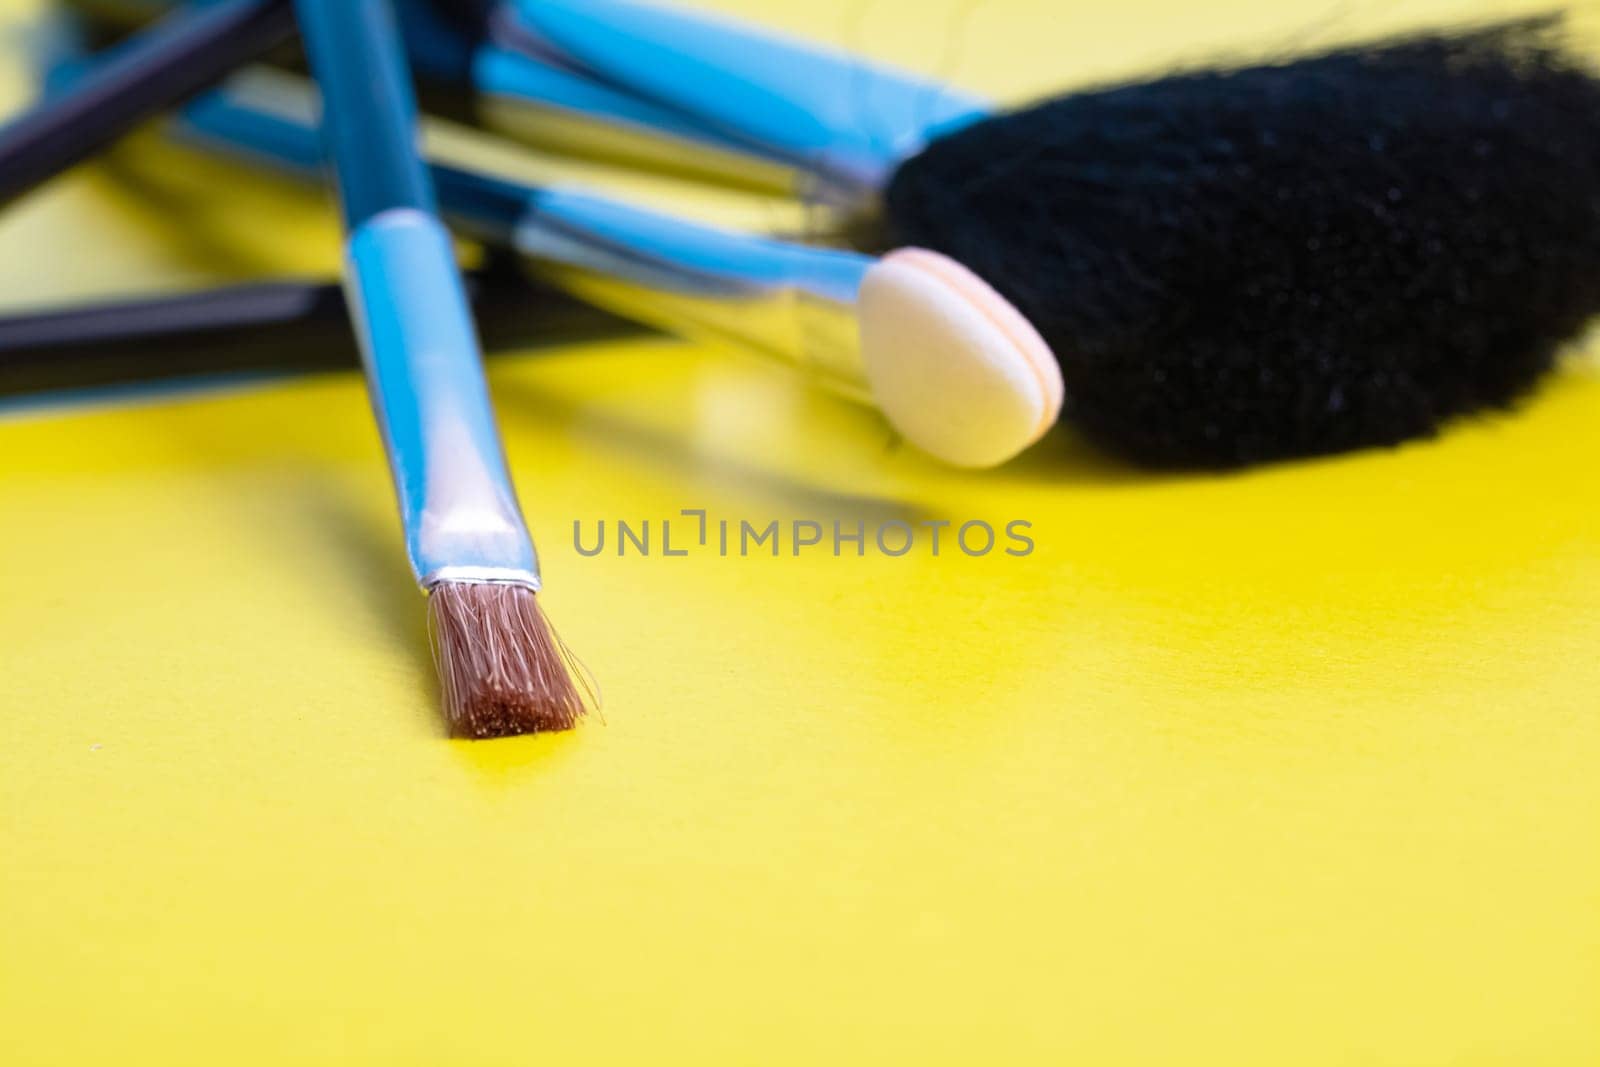 Makeup brushes on a yellow background closeup by Vera1703